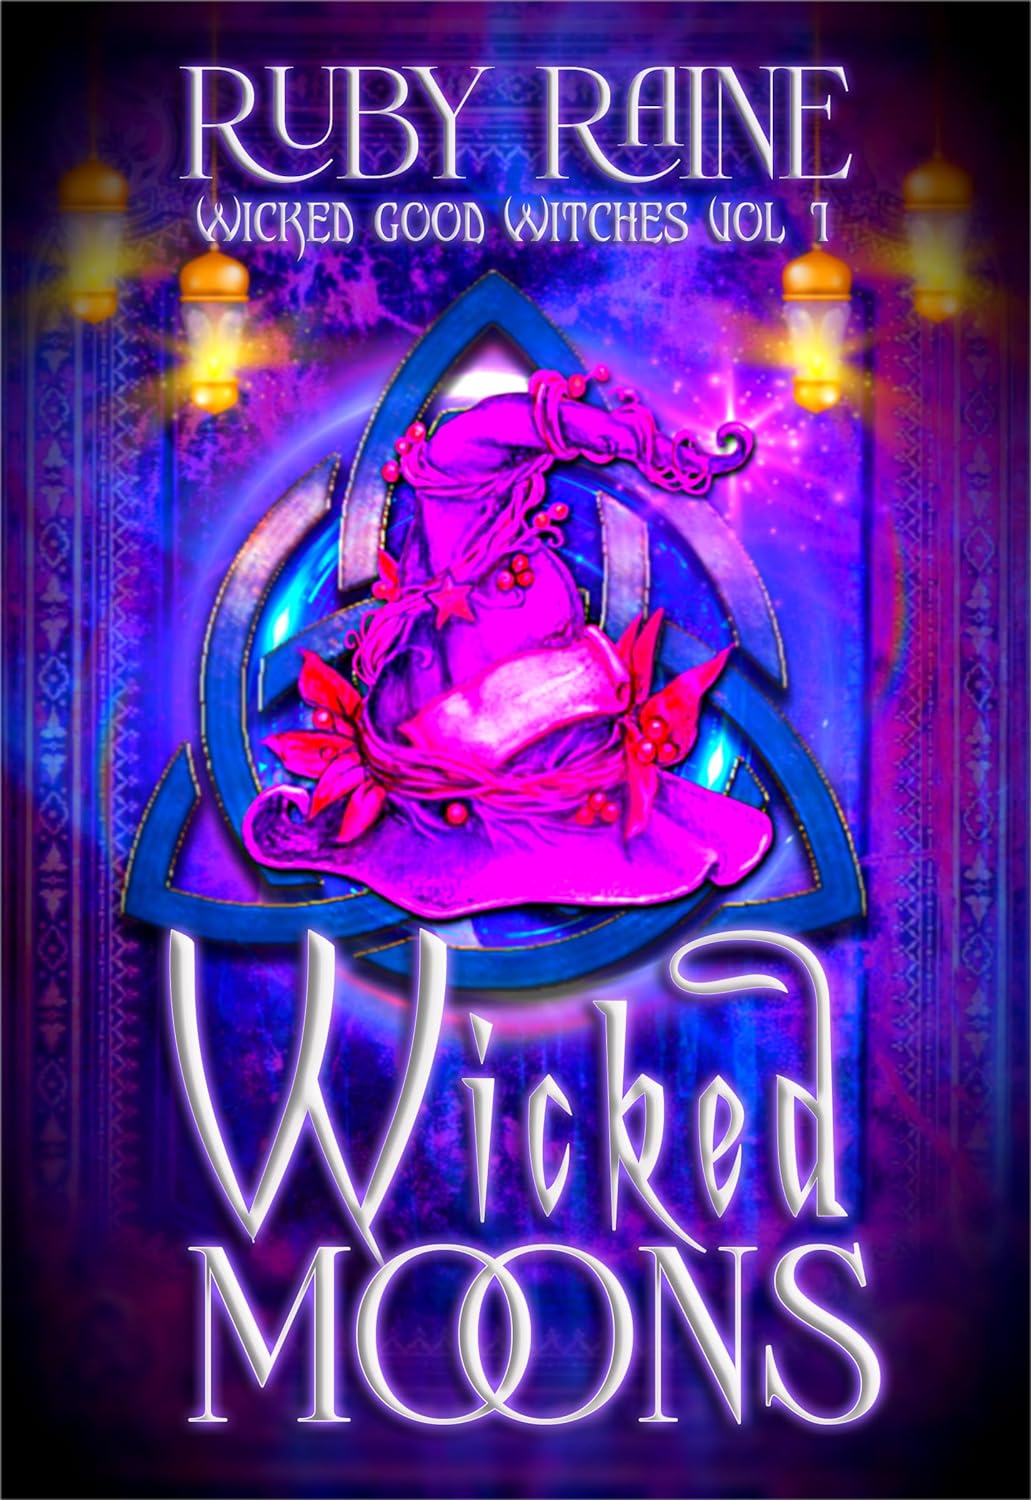 Wicked Moons - Supernatural Witch Mystery & Romance - Wicked Good Witches Book 1 is free on Amazon Kindle